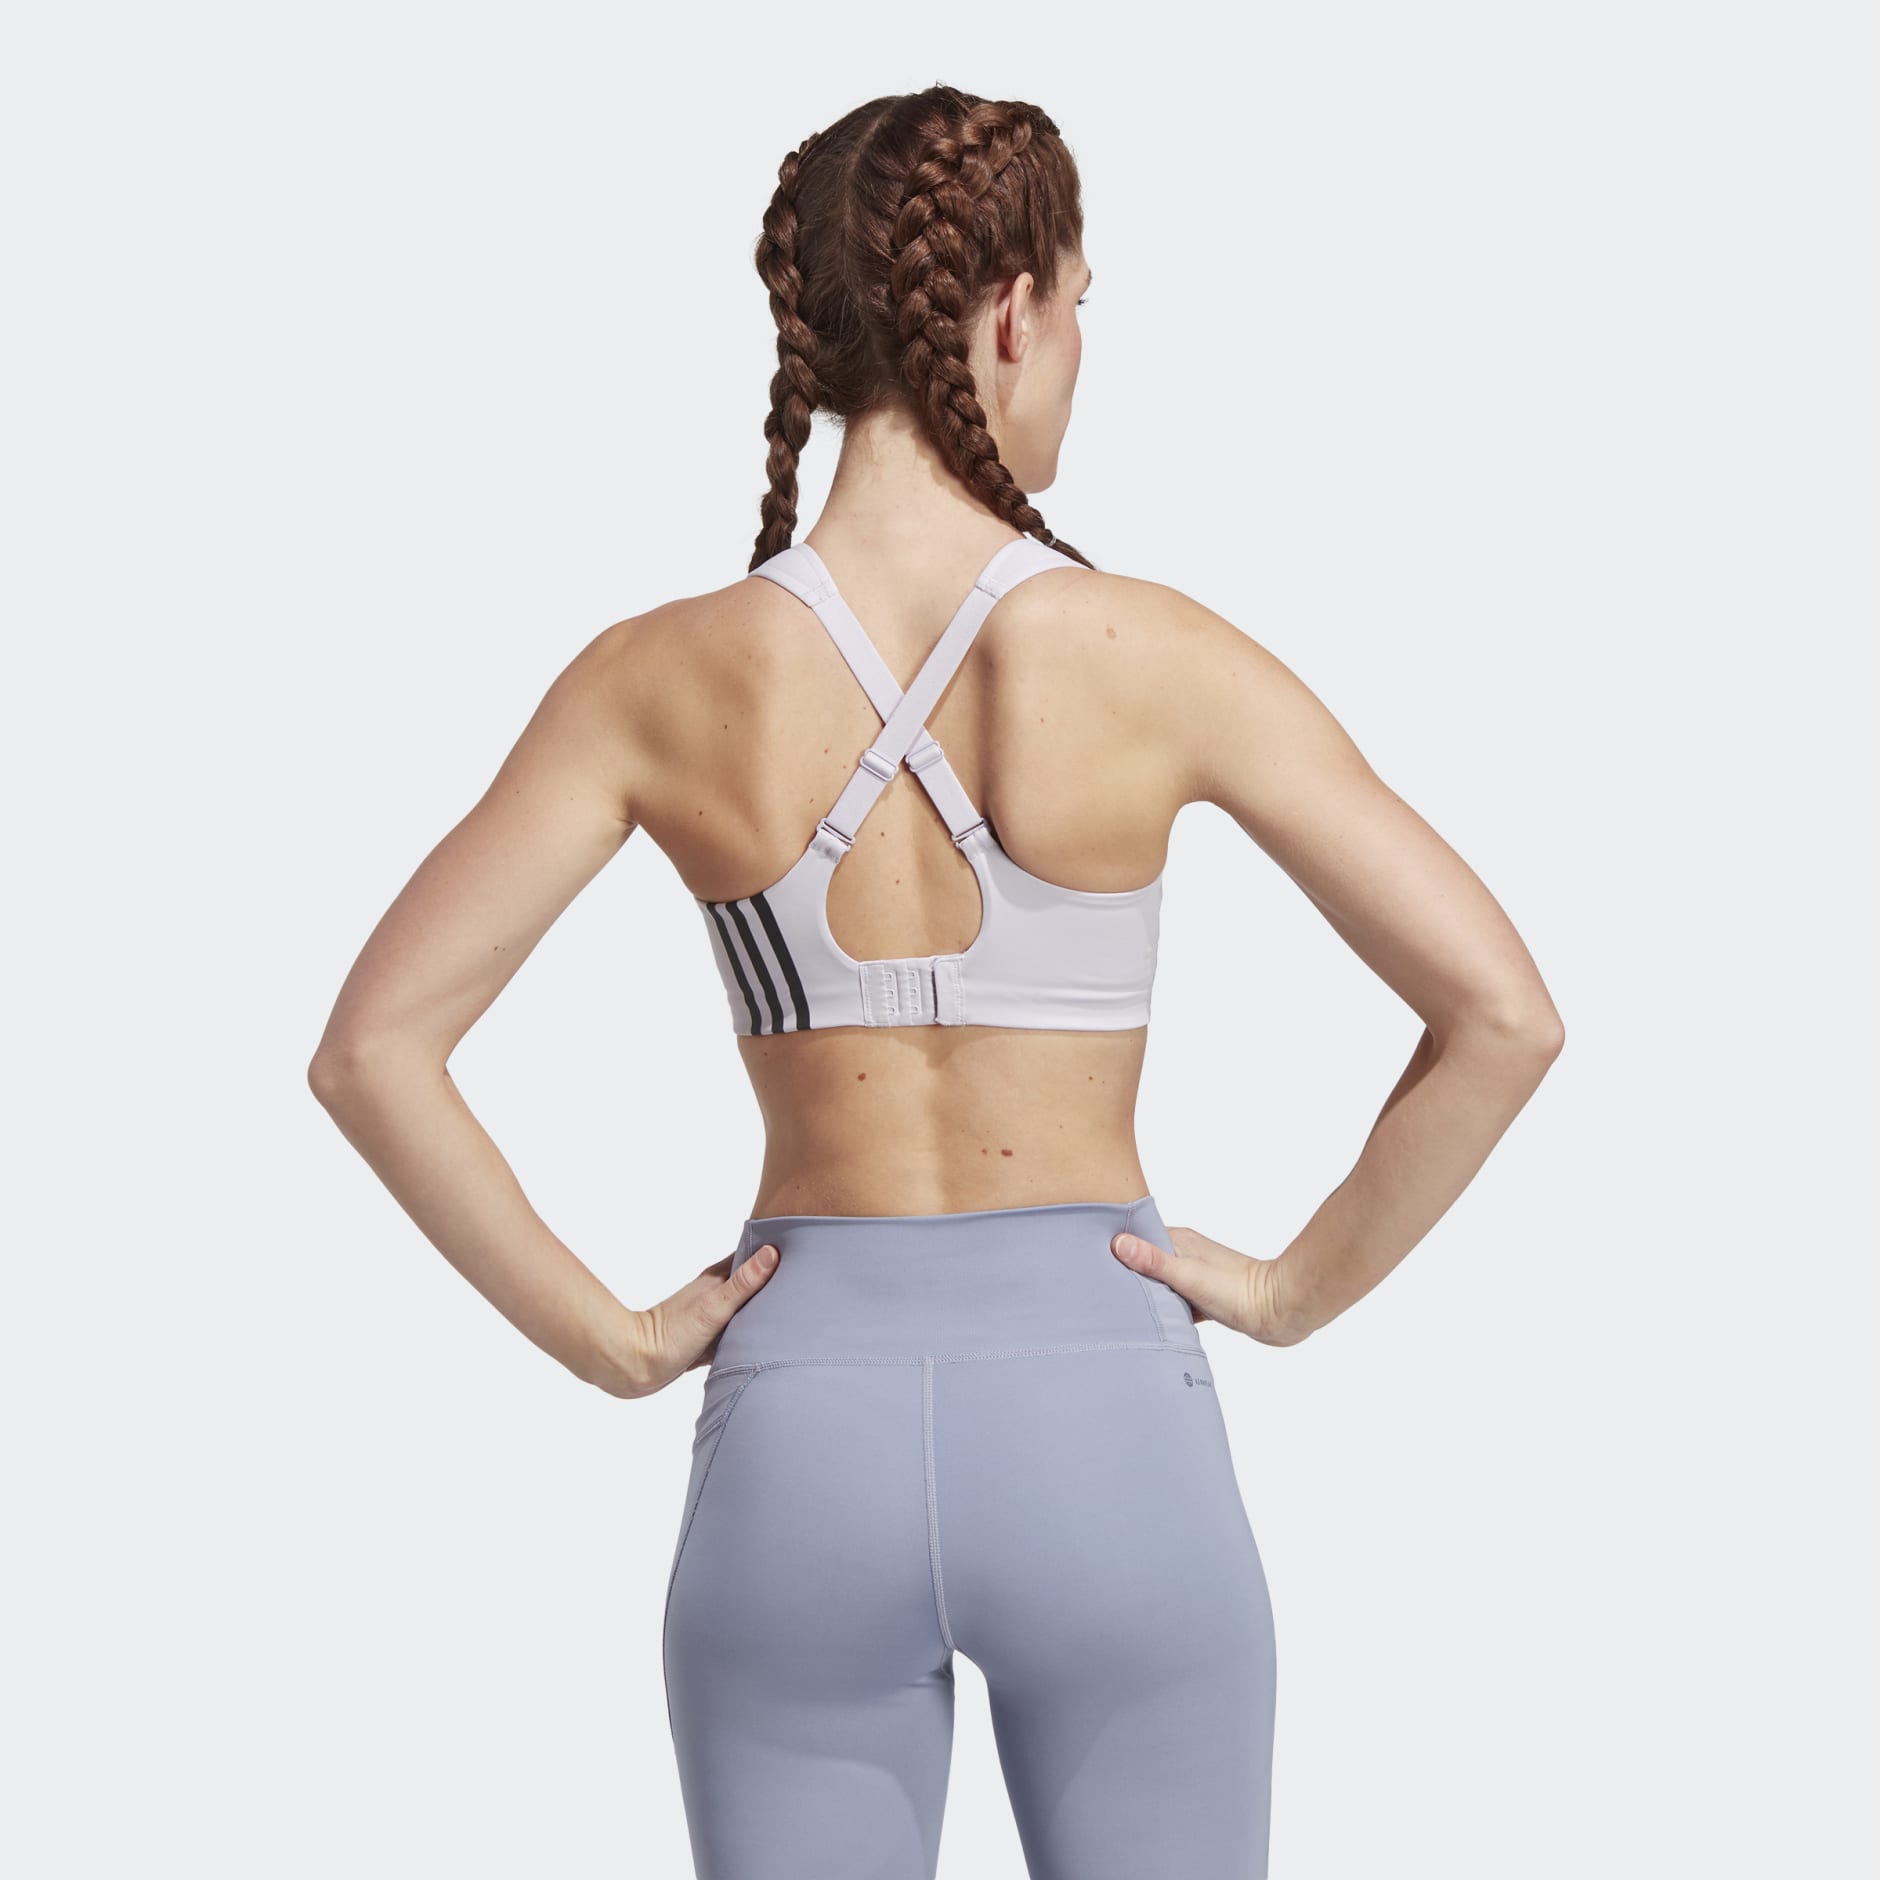 adidas TLRD Impact Training Women's High-Support Bra - Free Shipping